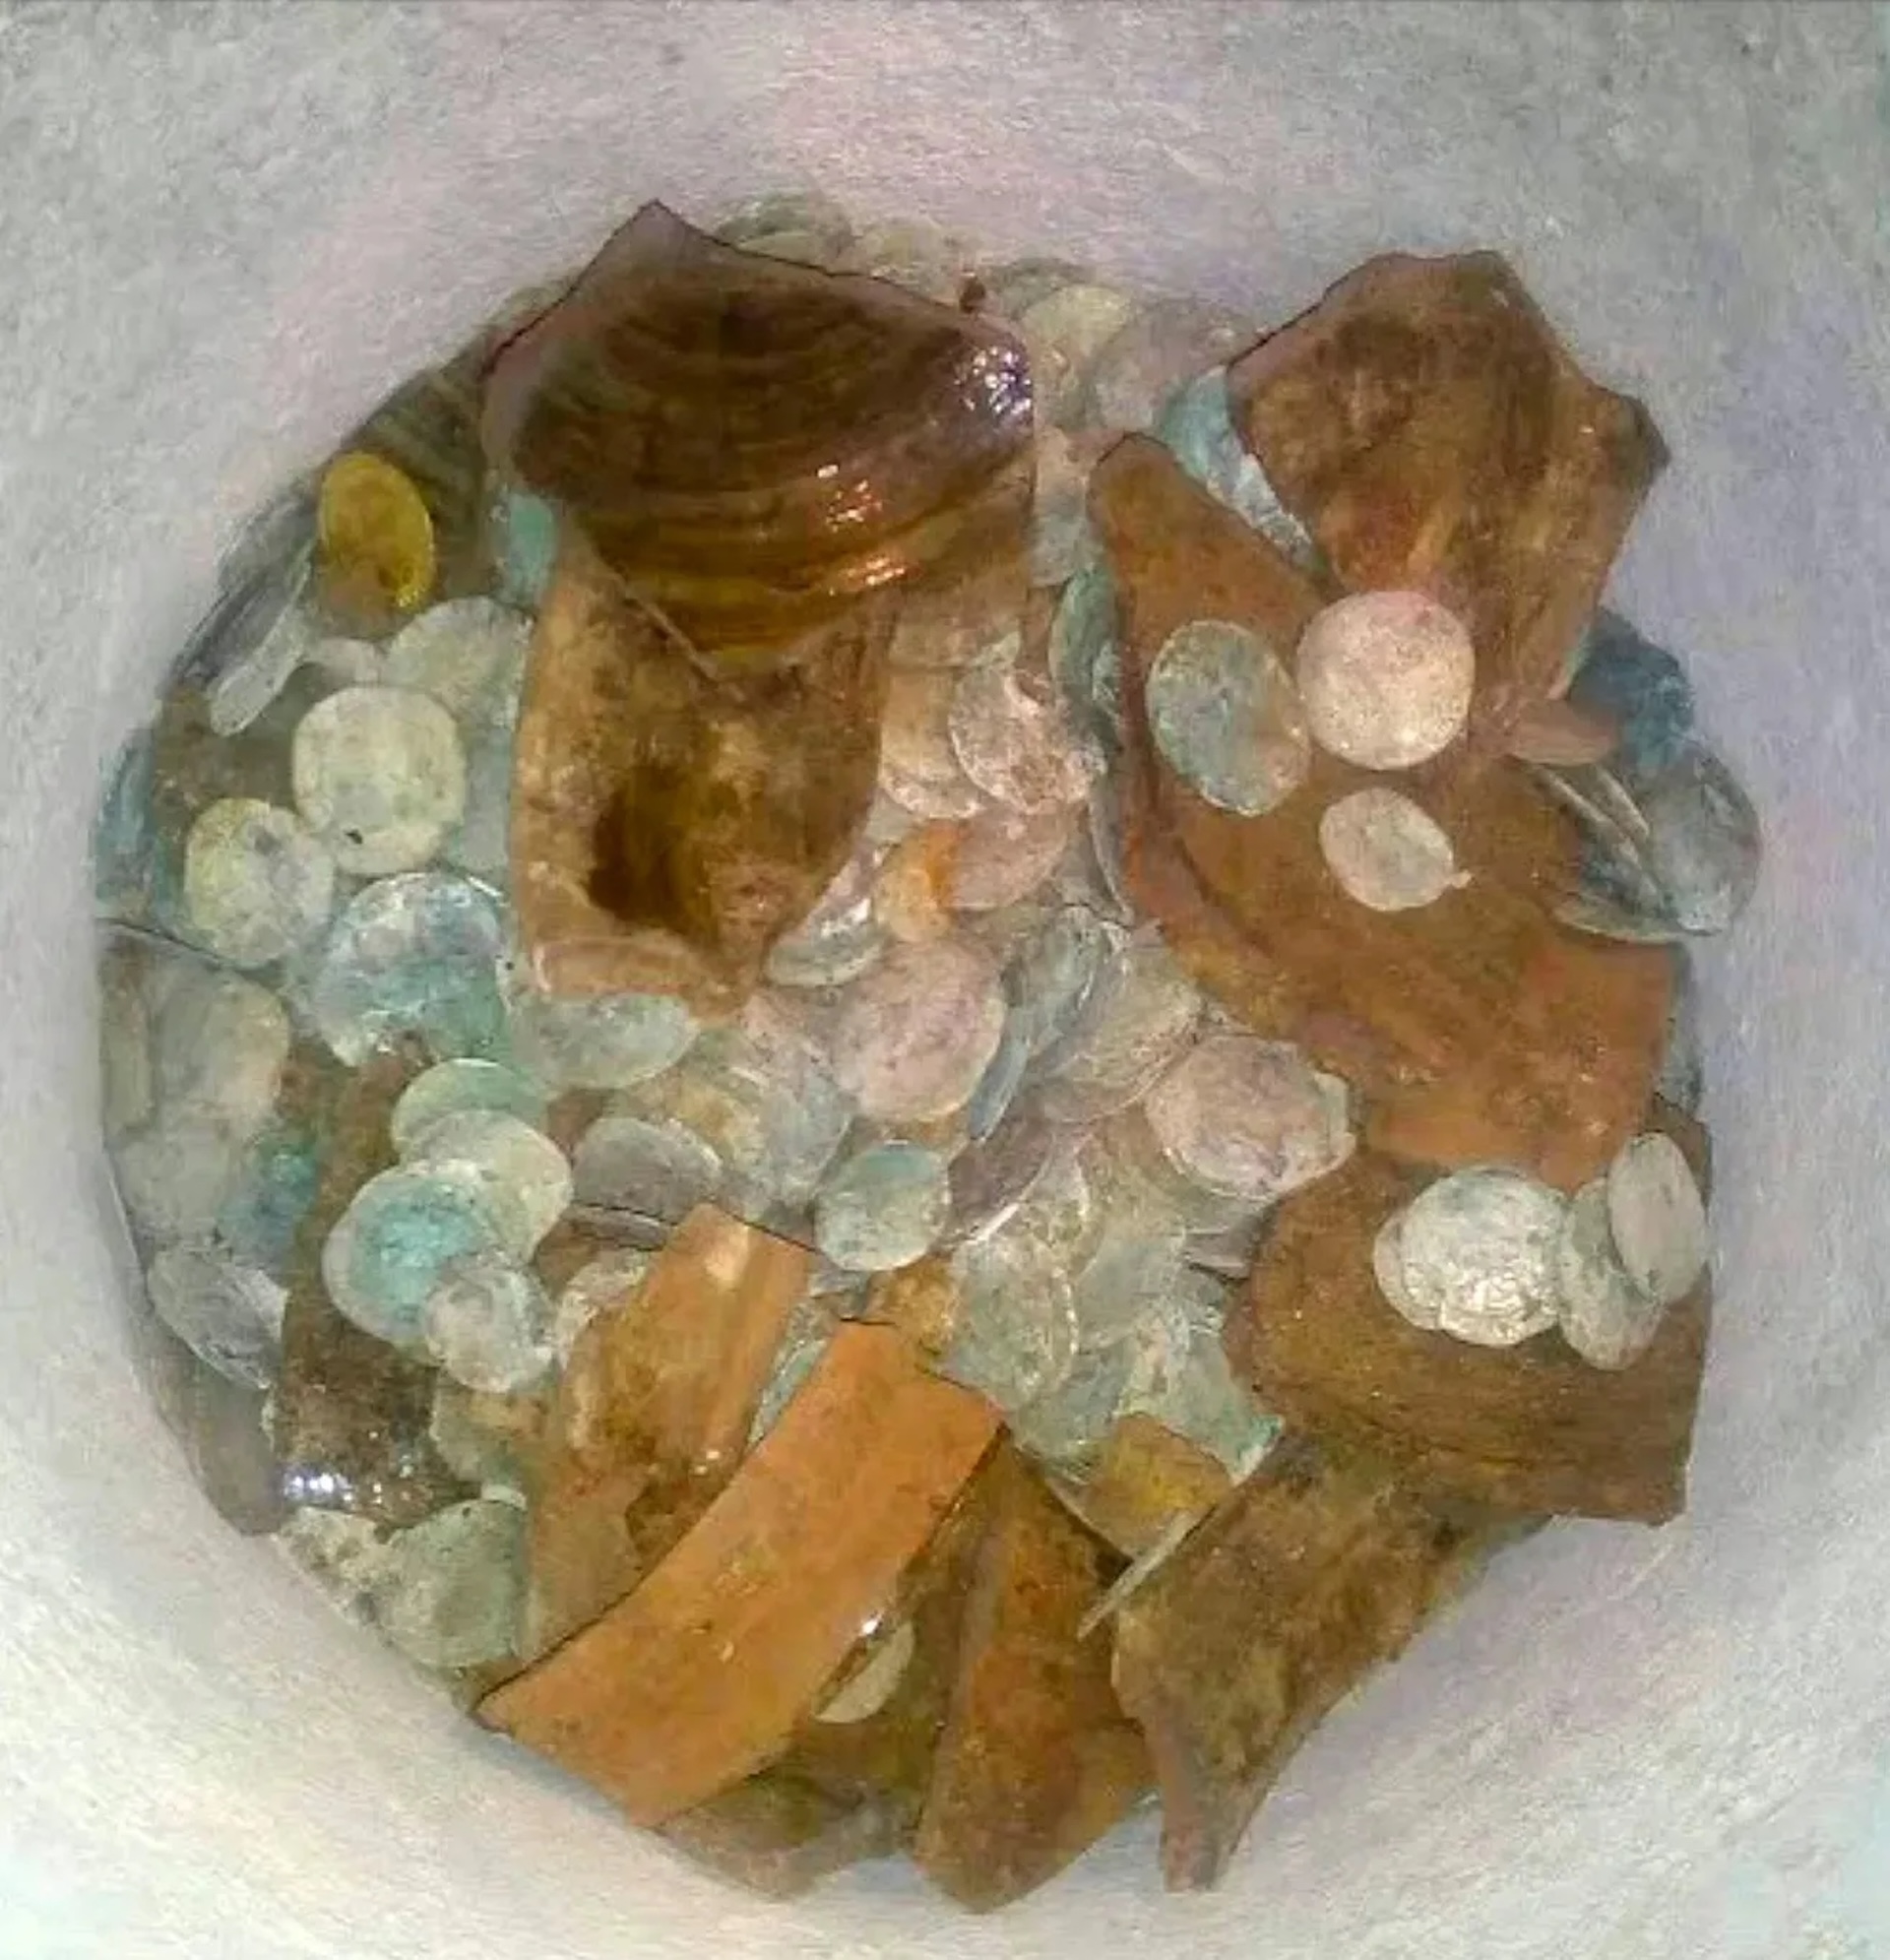 hoard of 17th-century coins hidden during english civil war unearthed during kitchen renovation